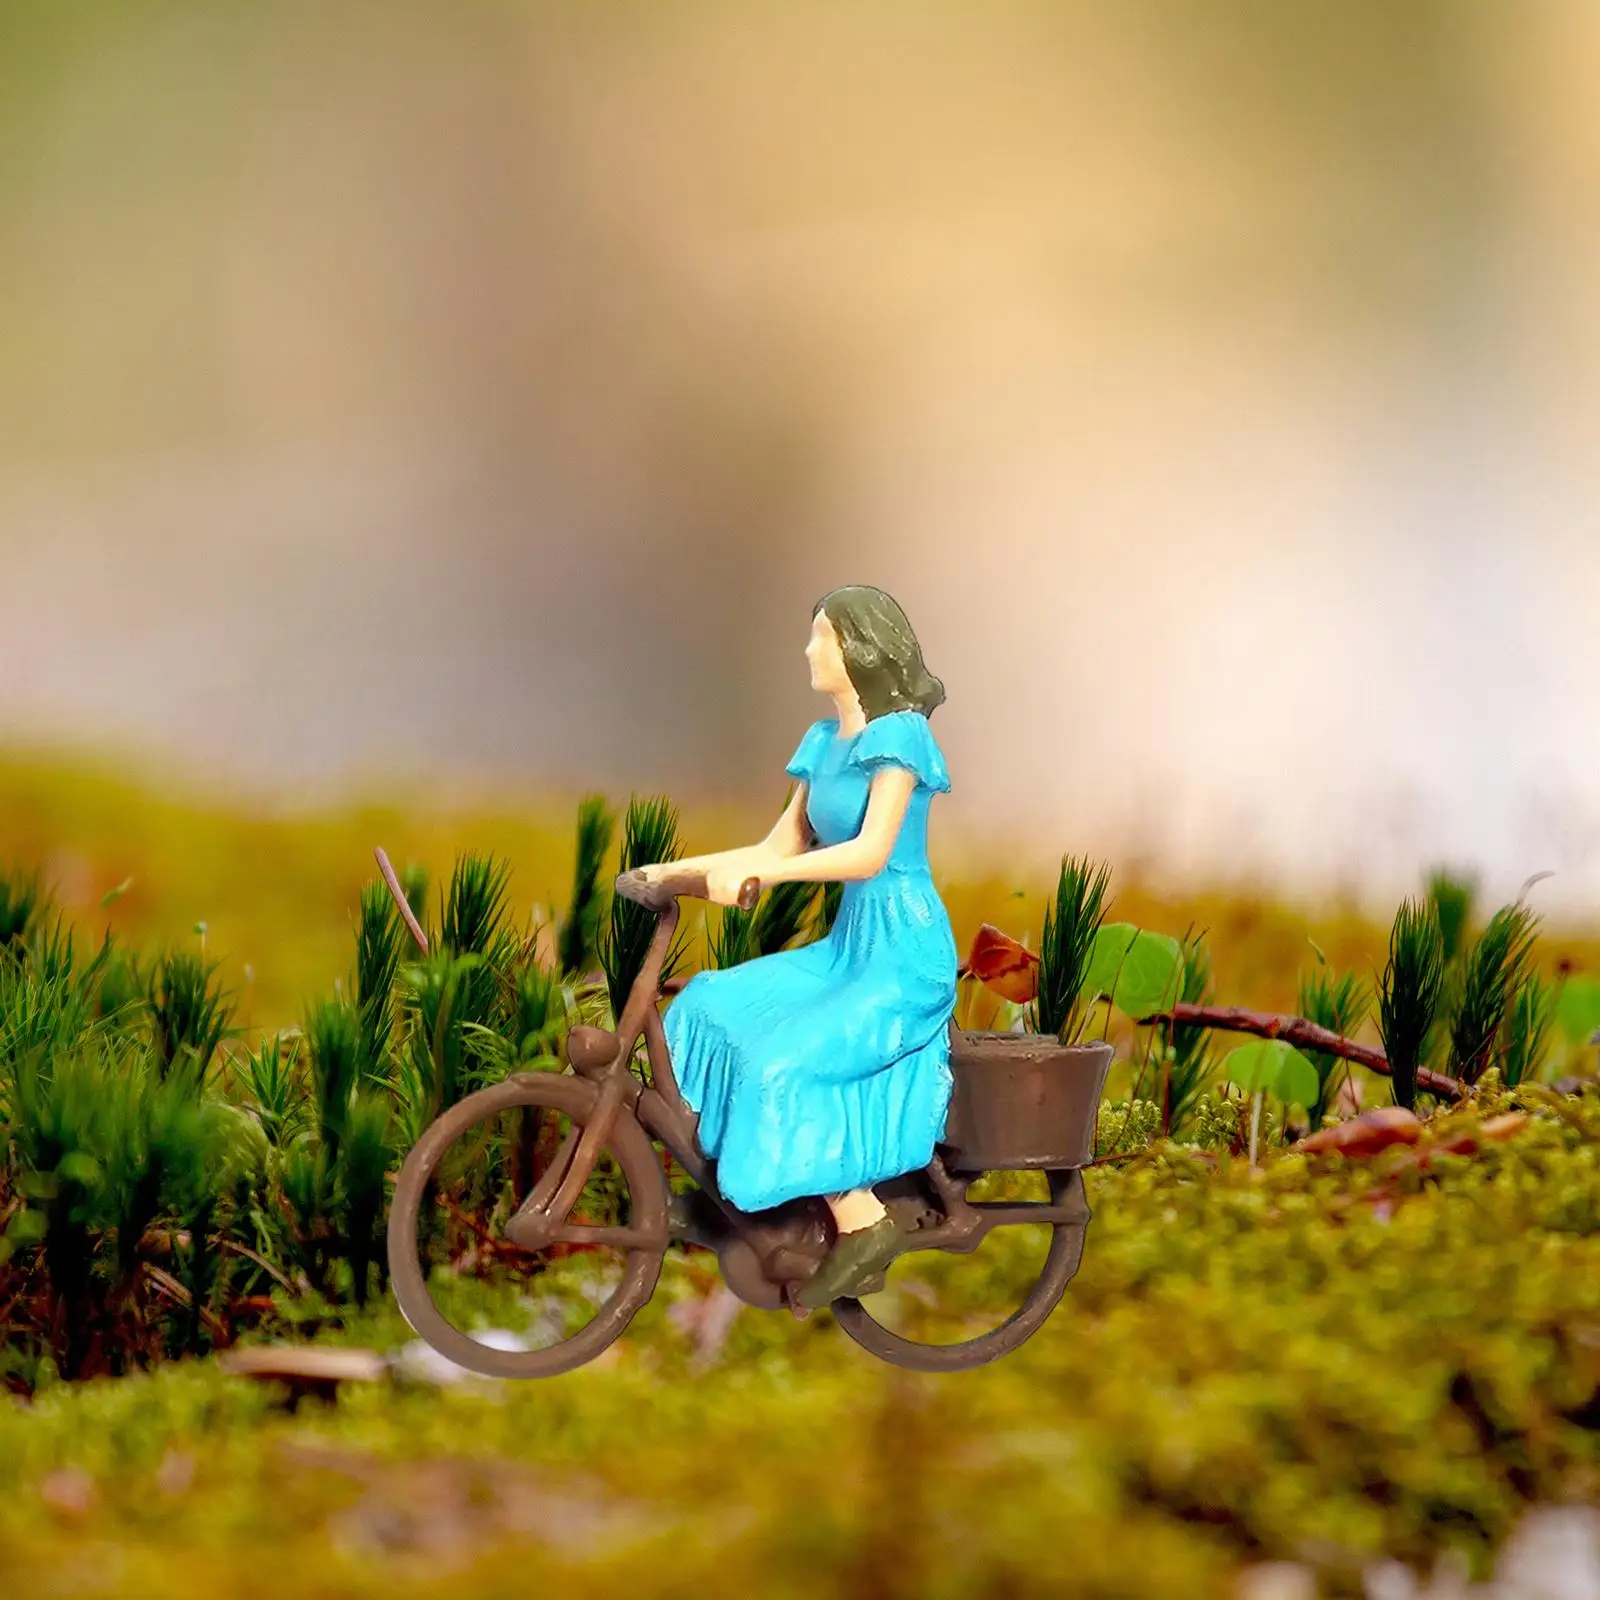 Resin 1/87 Scale Cyclist Figurine Simulation People Figurines Tiny People Mini People Model for Cycling Scene Layout Decoration